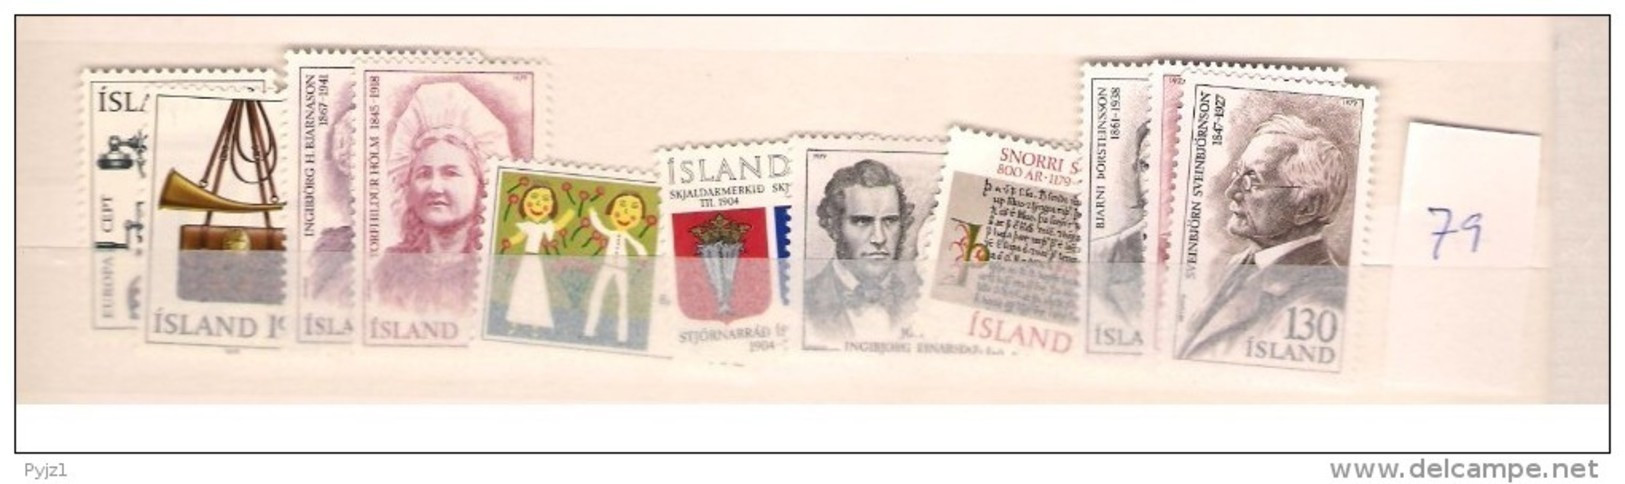 1979 MNH Iceland, Island, Year Complete, Posffris - Années Complètes